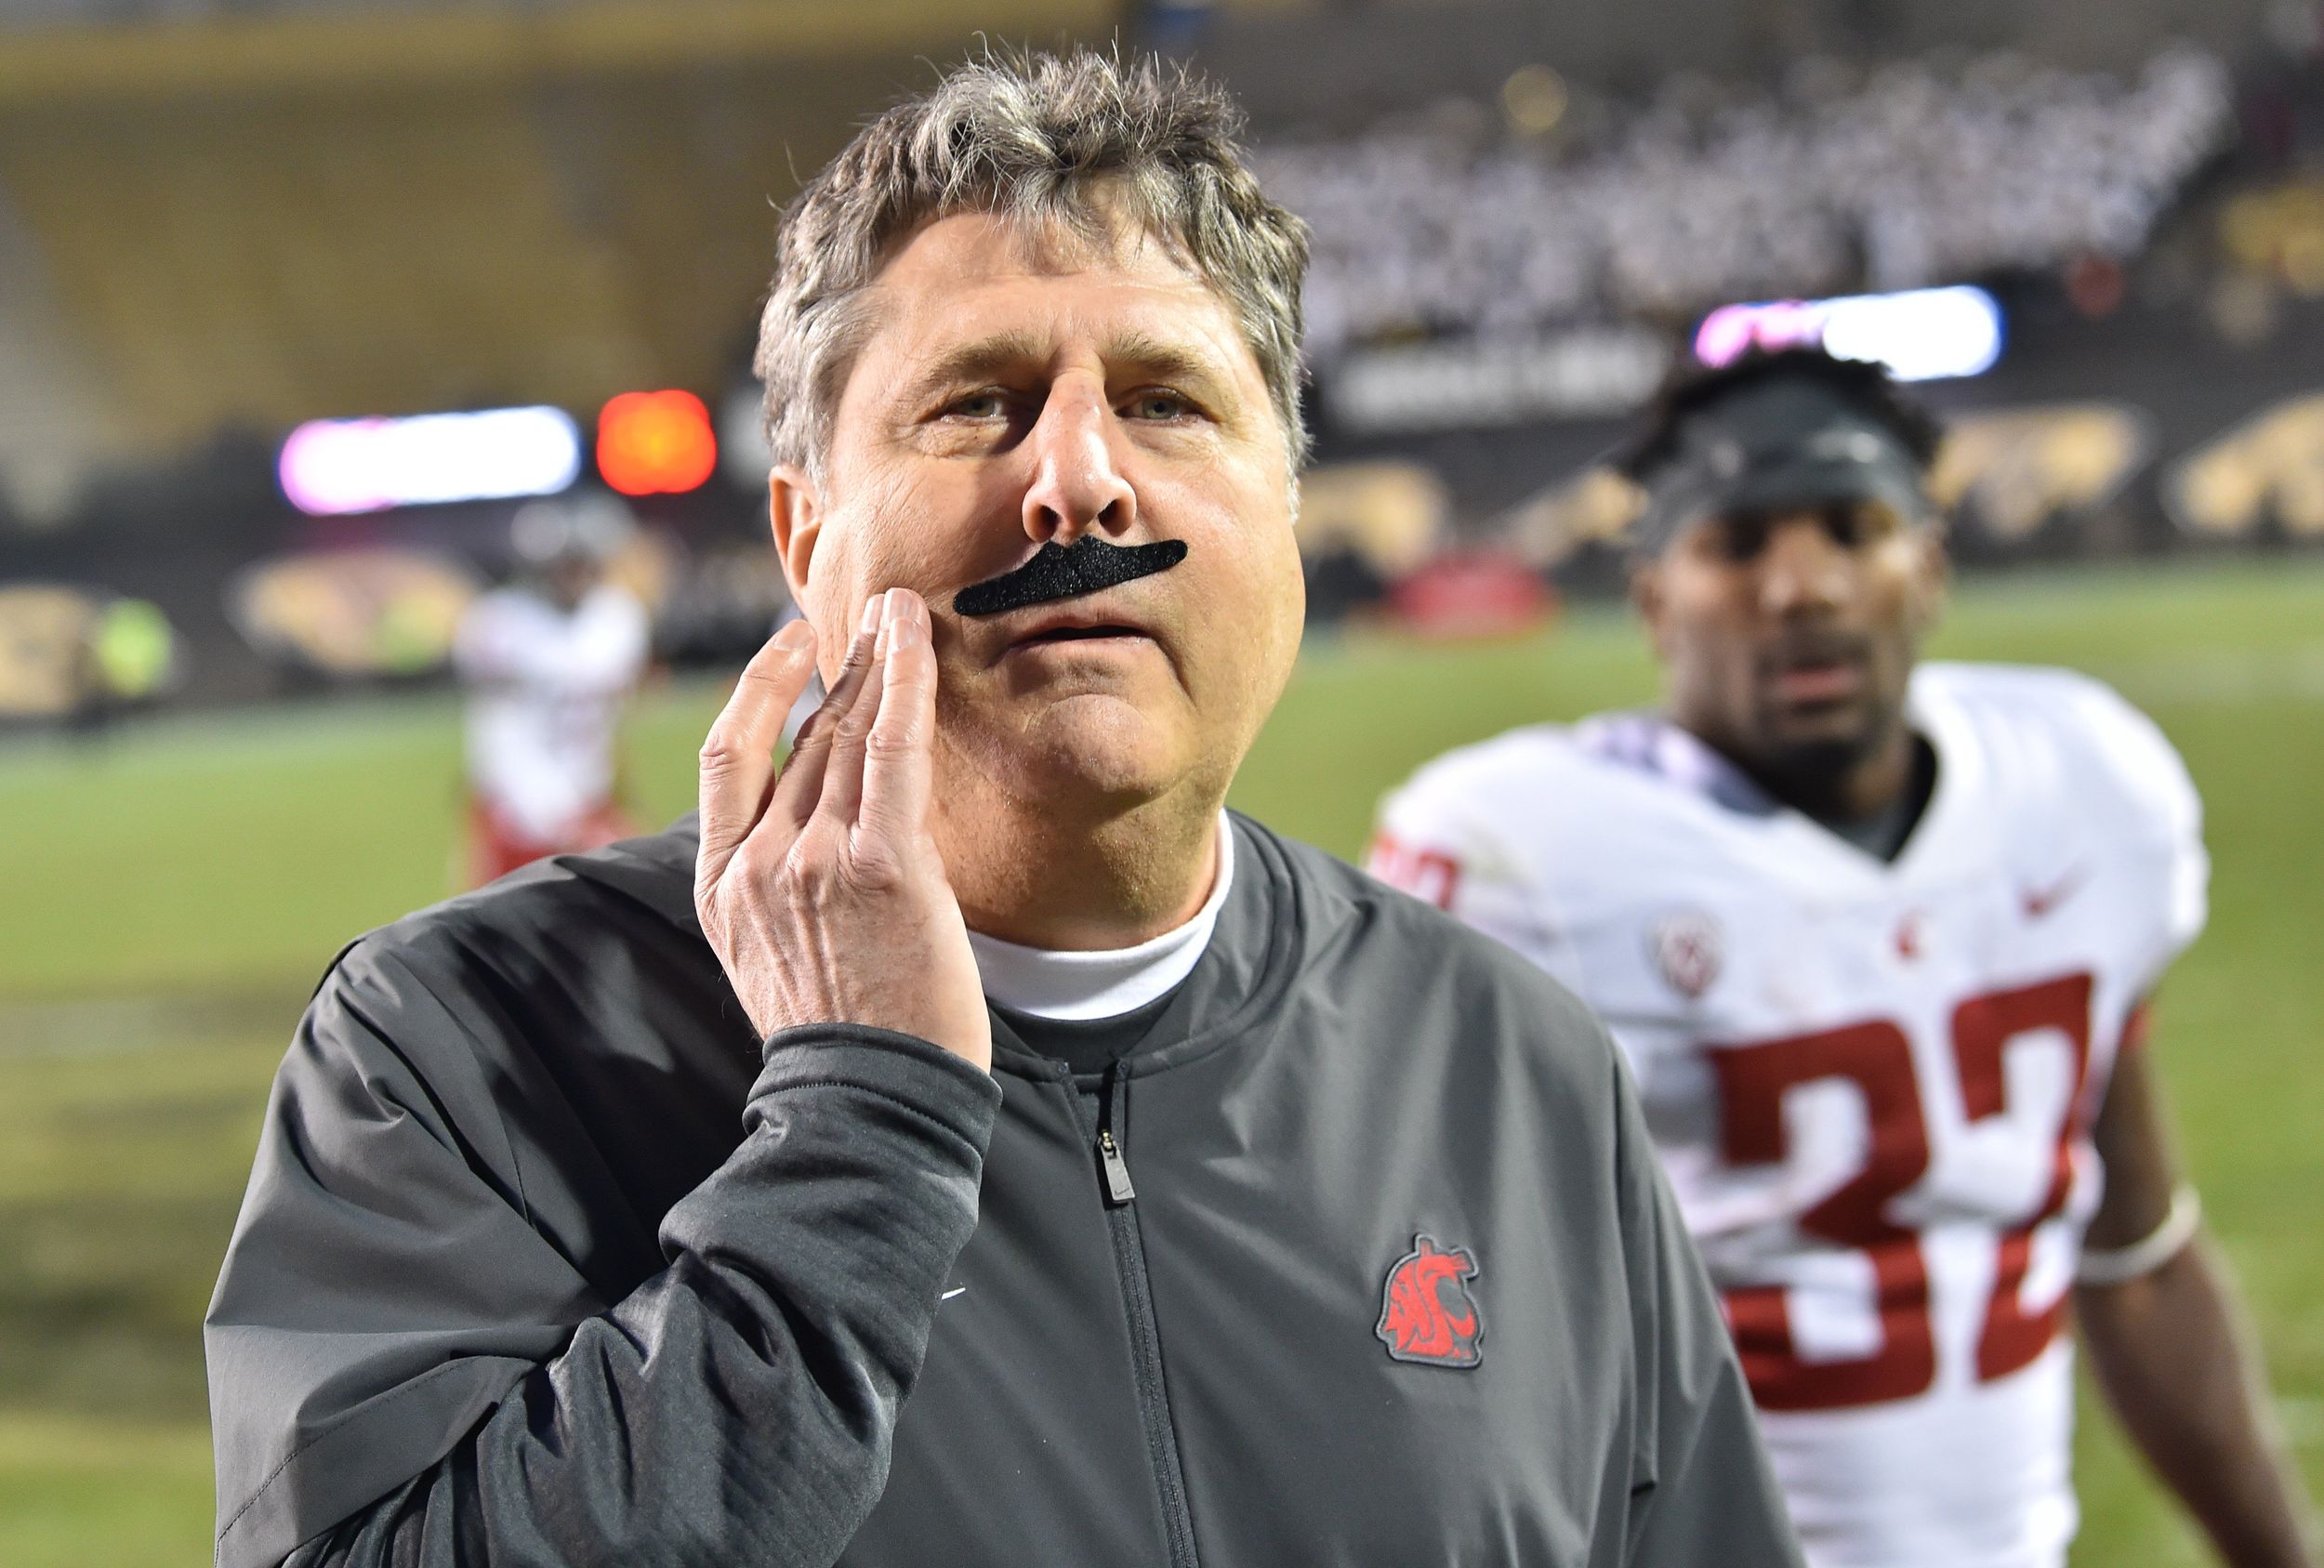 He really did make a big splash on football': Former Washington State football  coach Mike Leach dies at 61 | The Spokesman-Review